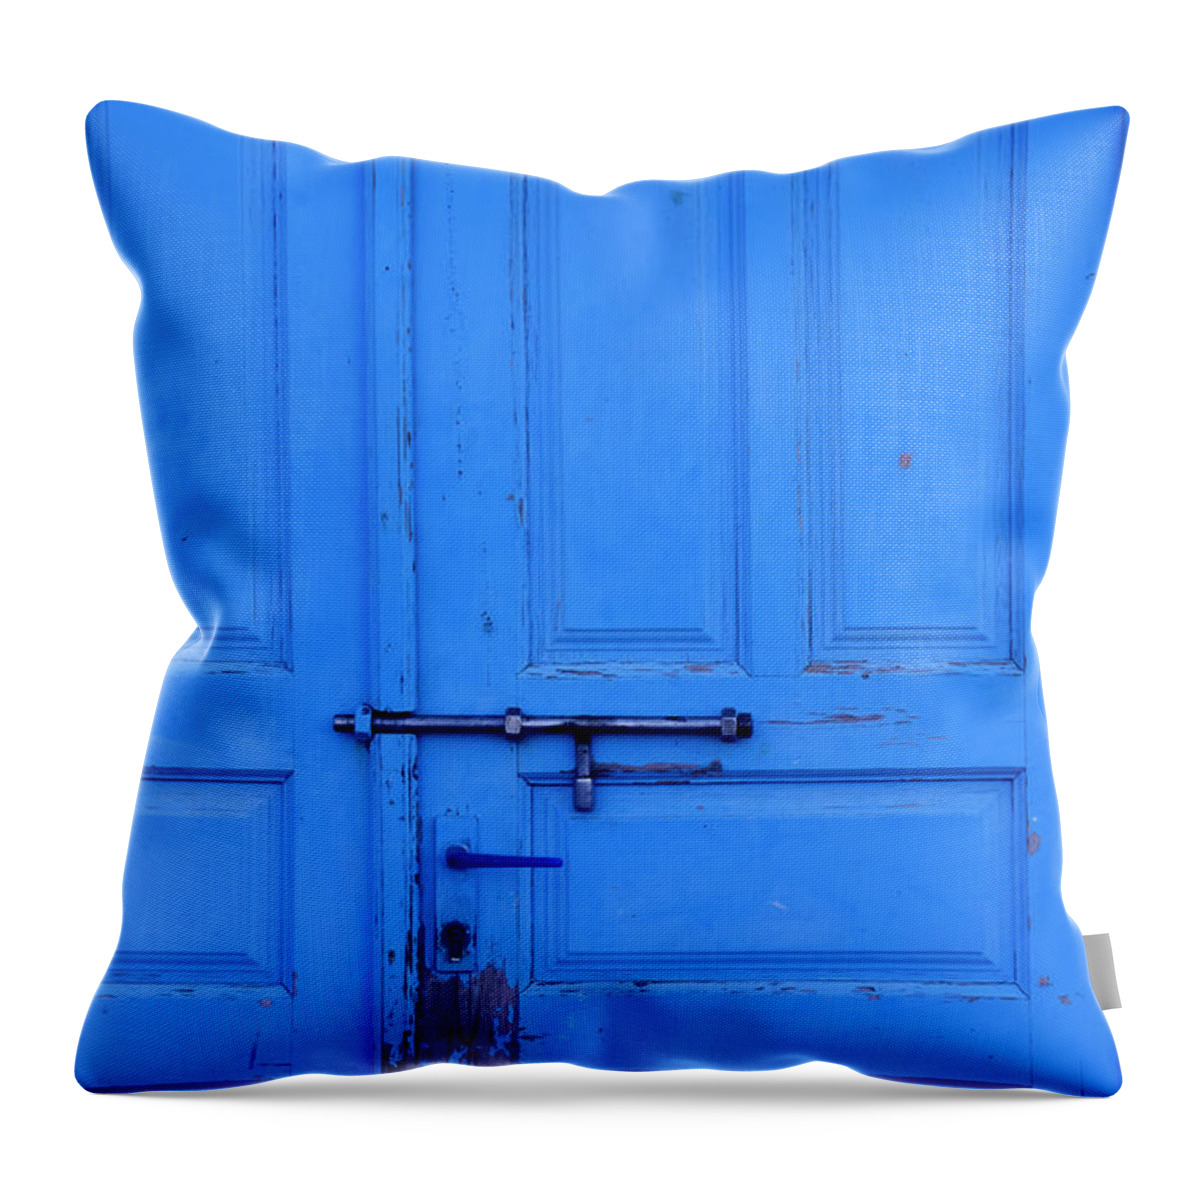 Handle Throw Pillow featuring the photograph Old Blue Door With Metal Bolt by Vmarin